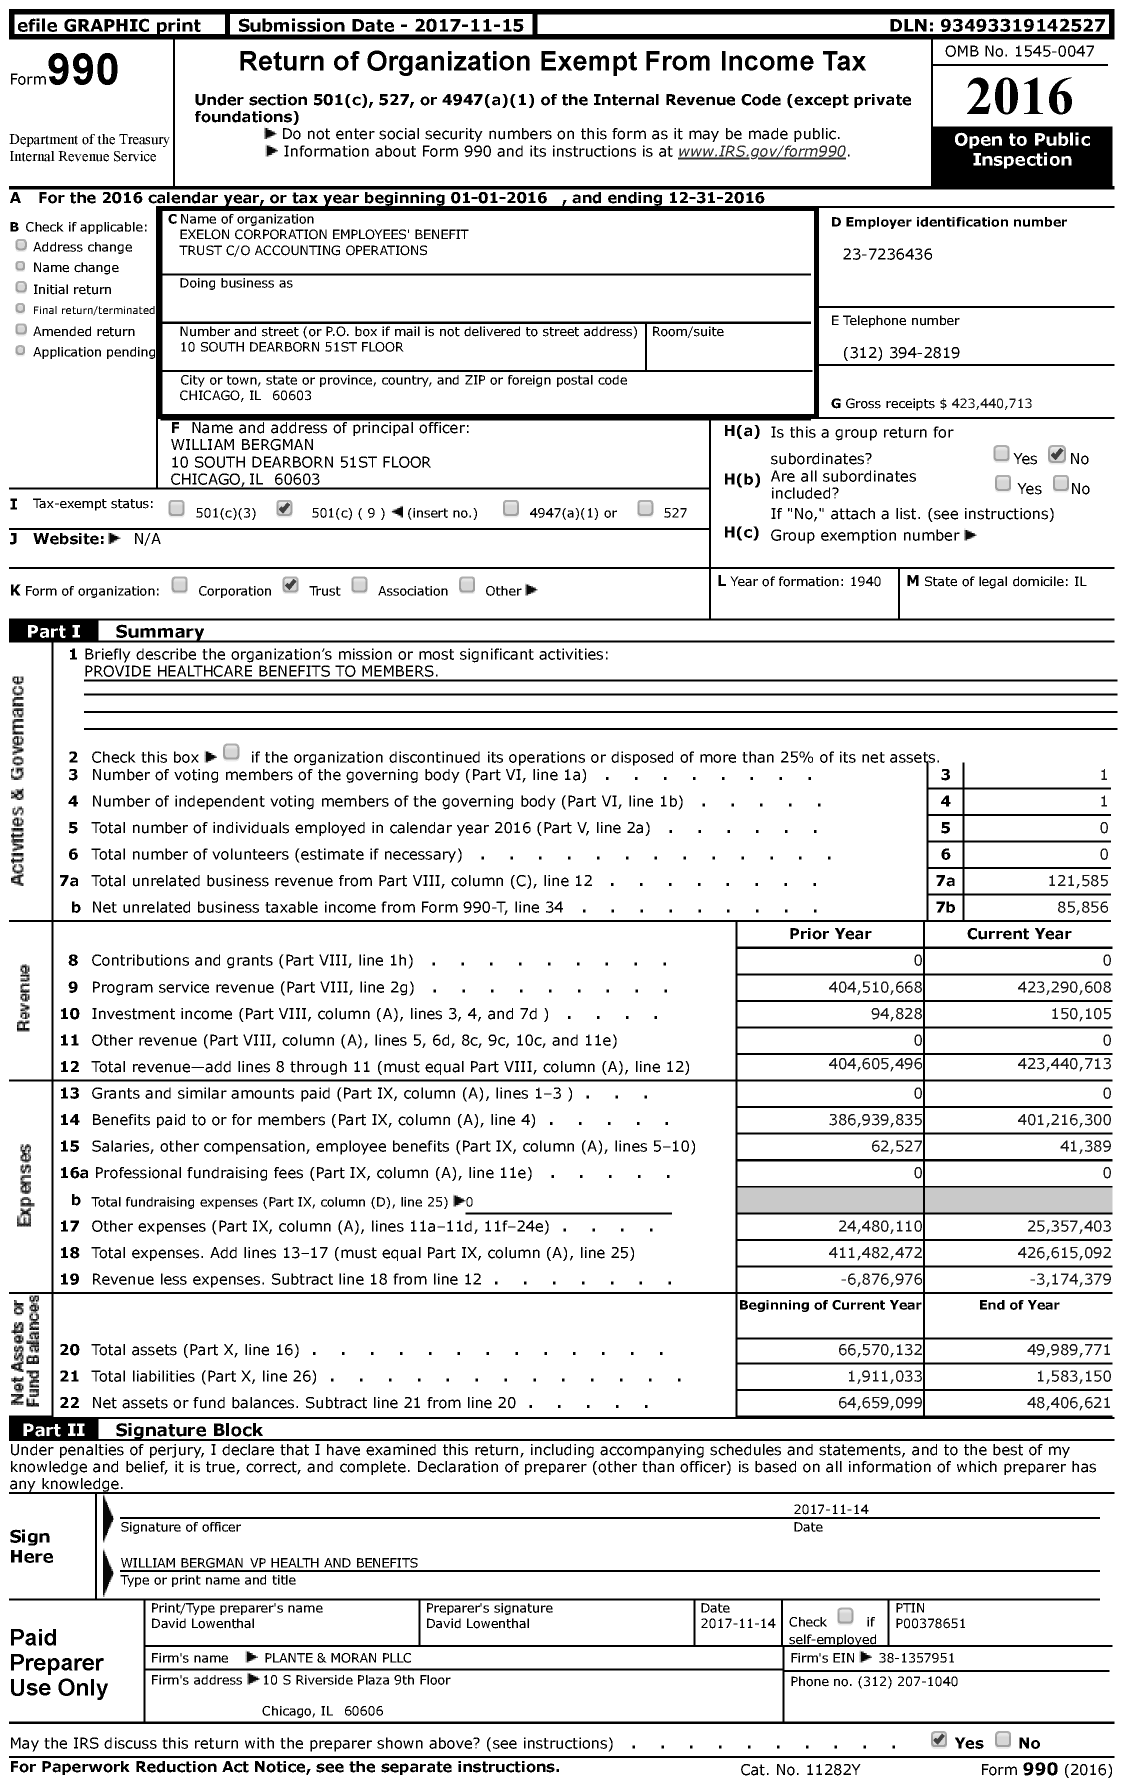 Image of first page of 2016 Form 990 for Exelon Corporation Employees' Benefit Trust